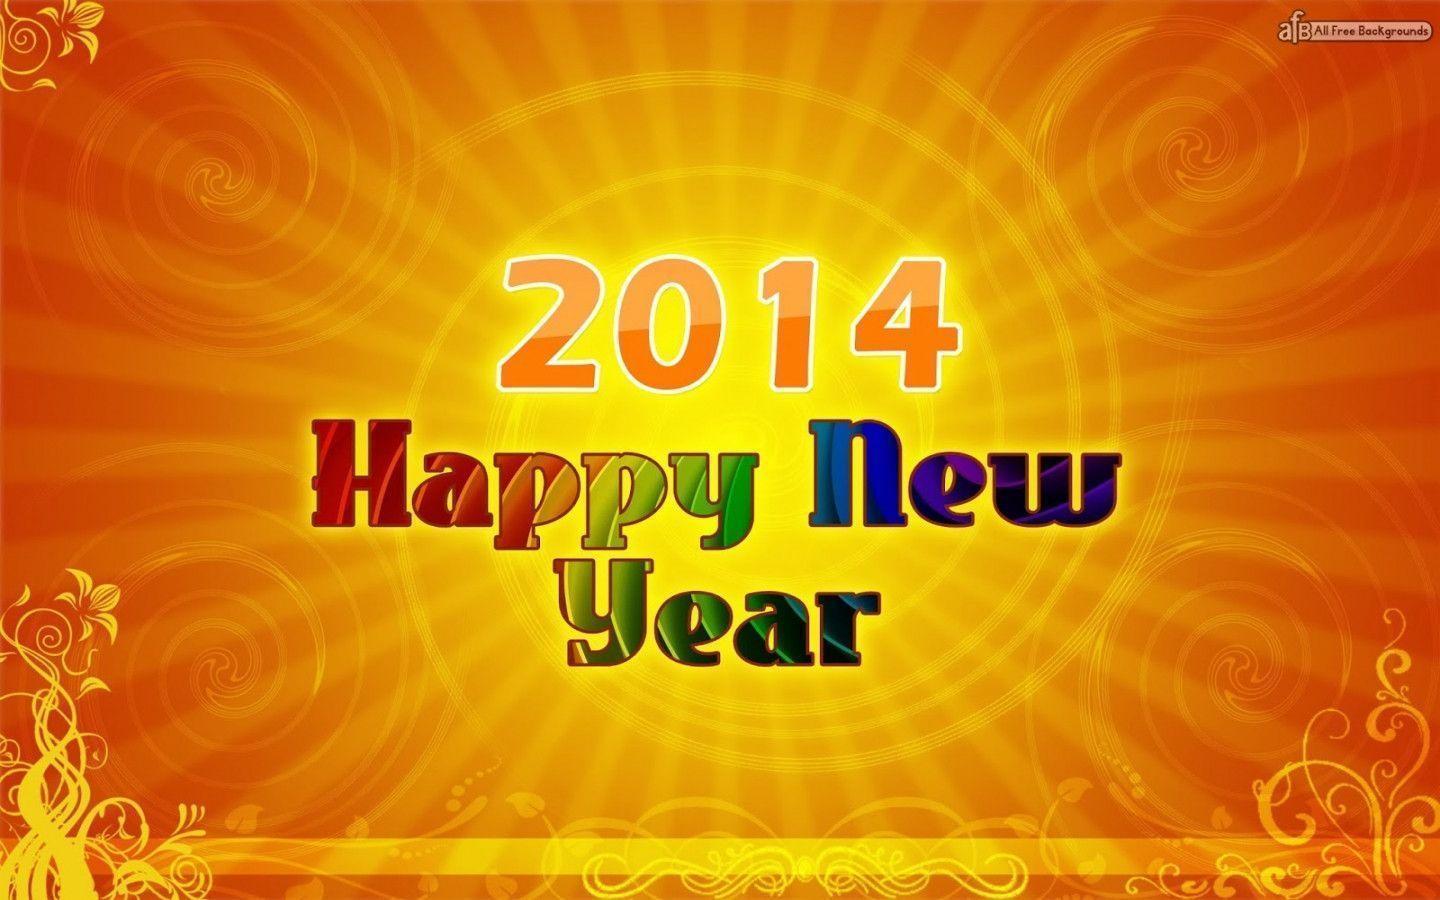 Free Download 1440x900 Resolution Of High Def Happy New Year 2014